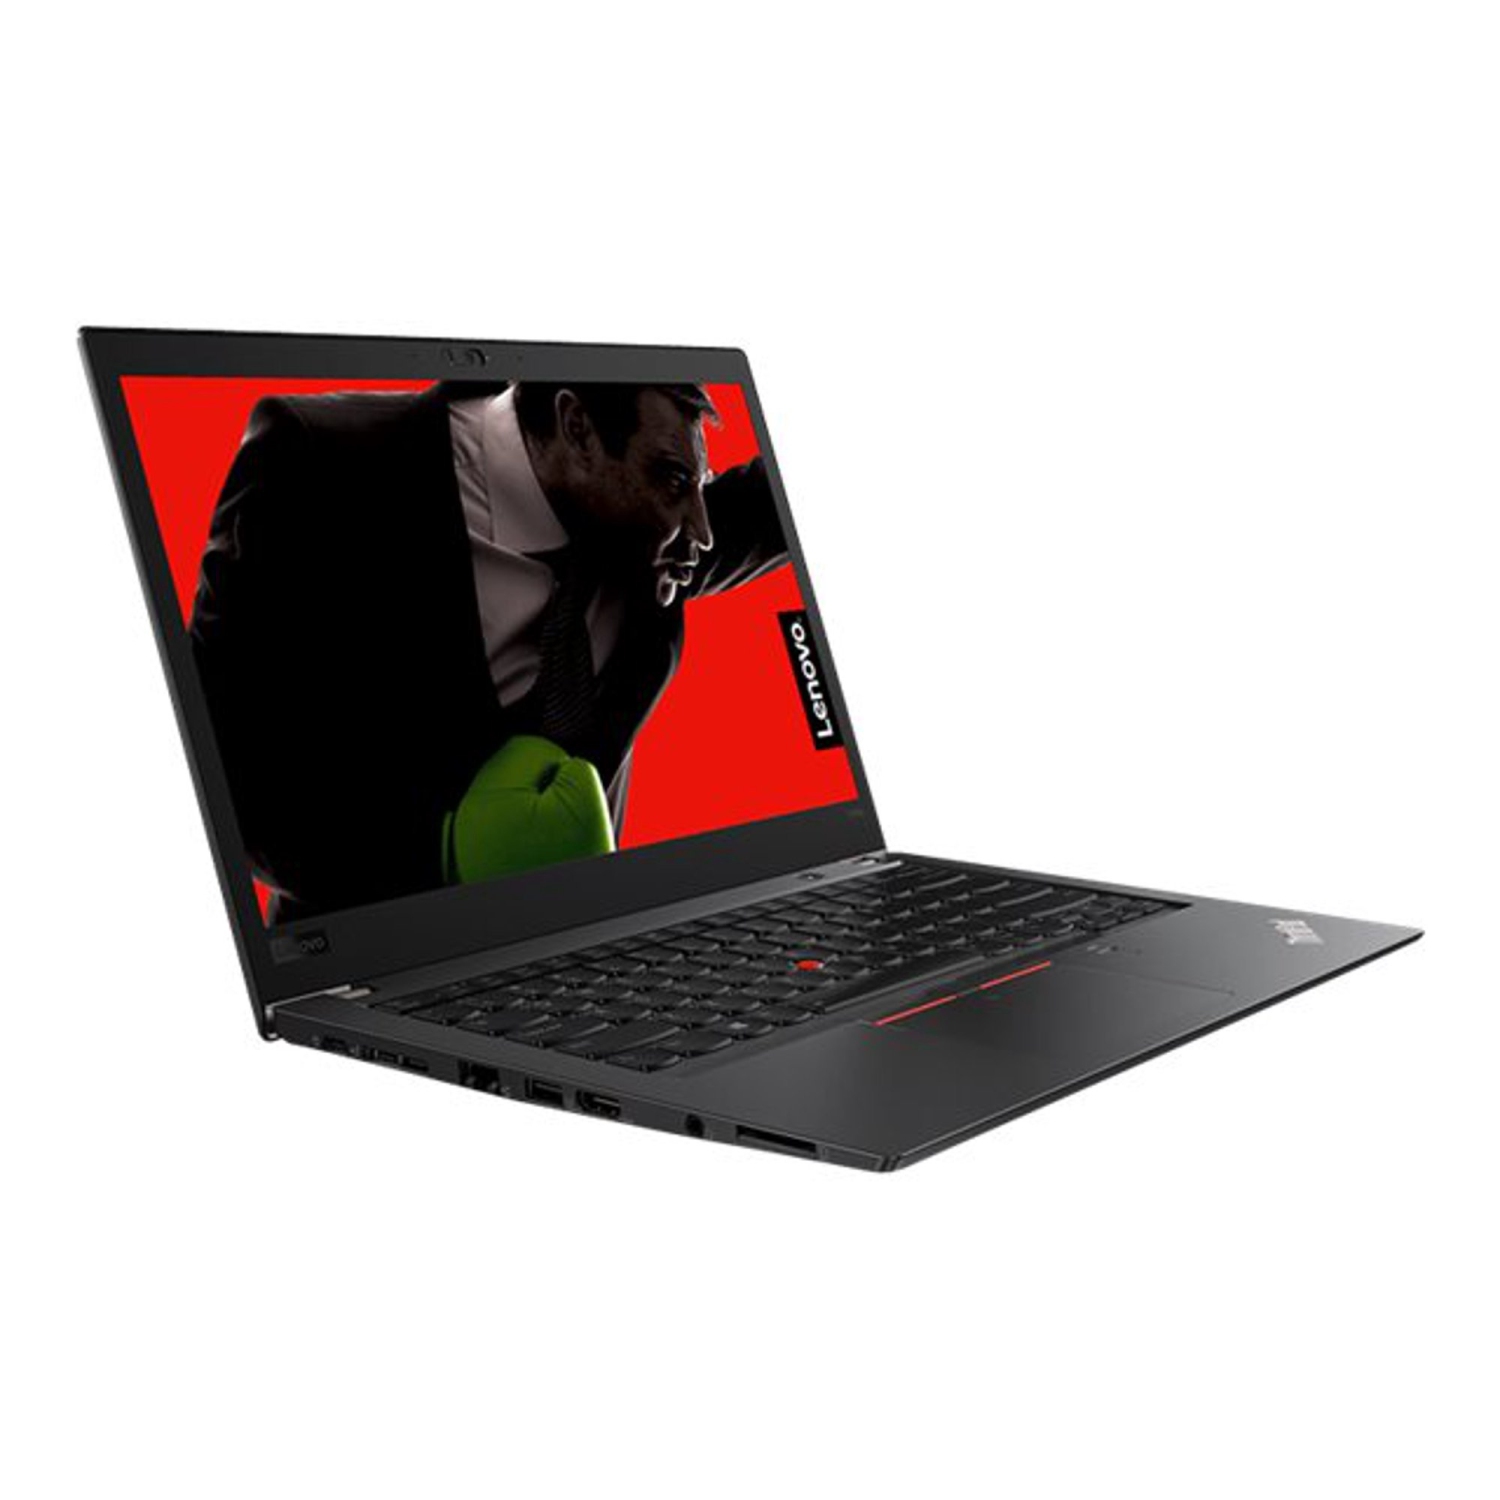 Refurbished (Good) - Lenovo ThinkPad T480s 14" Laptop, Core i7-8650U 1.7GHz, 24 DDR4, NEW 1 TB NVMe SSD, Windows 10 Pro. Win 11 Ready . Grade A & very Good condition